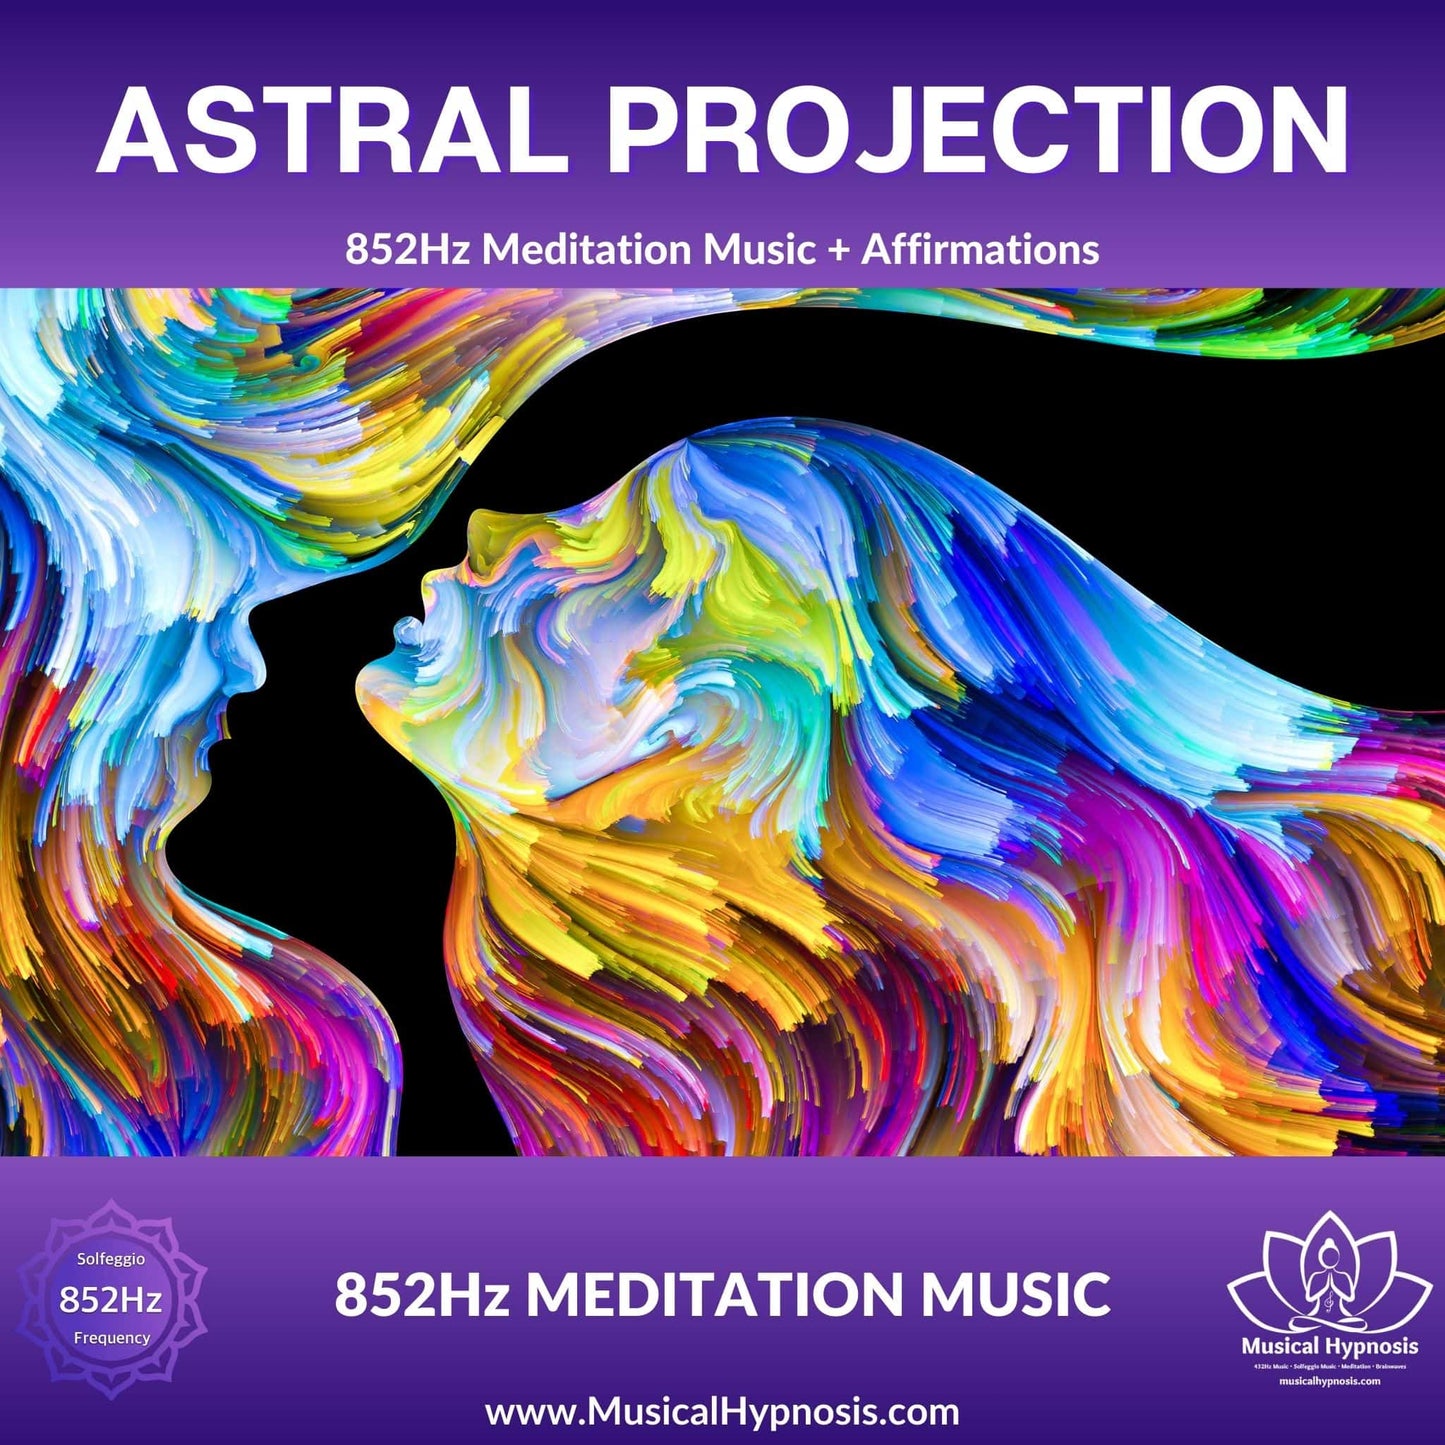 Astral Projection • 852Hz Meditation Music + Affirmations by Musical Hypnosis